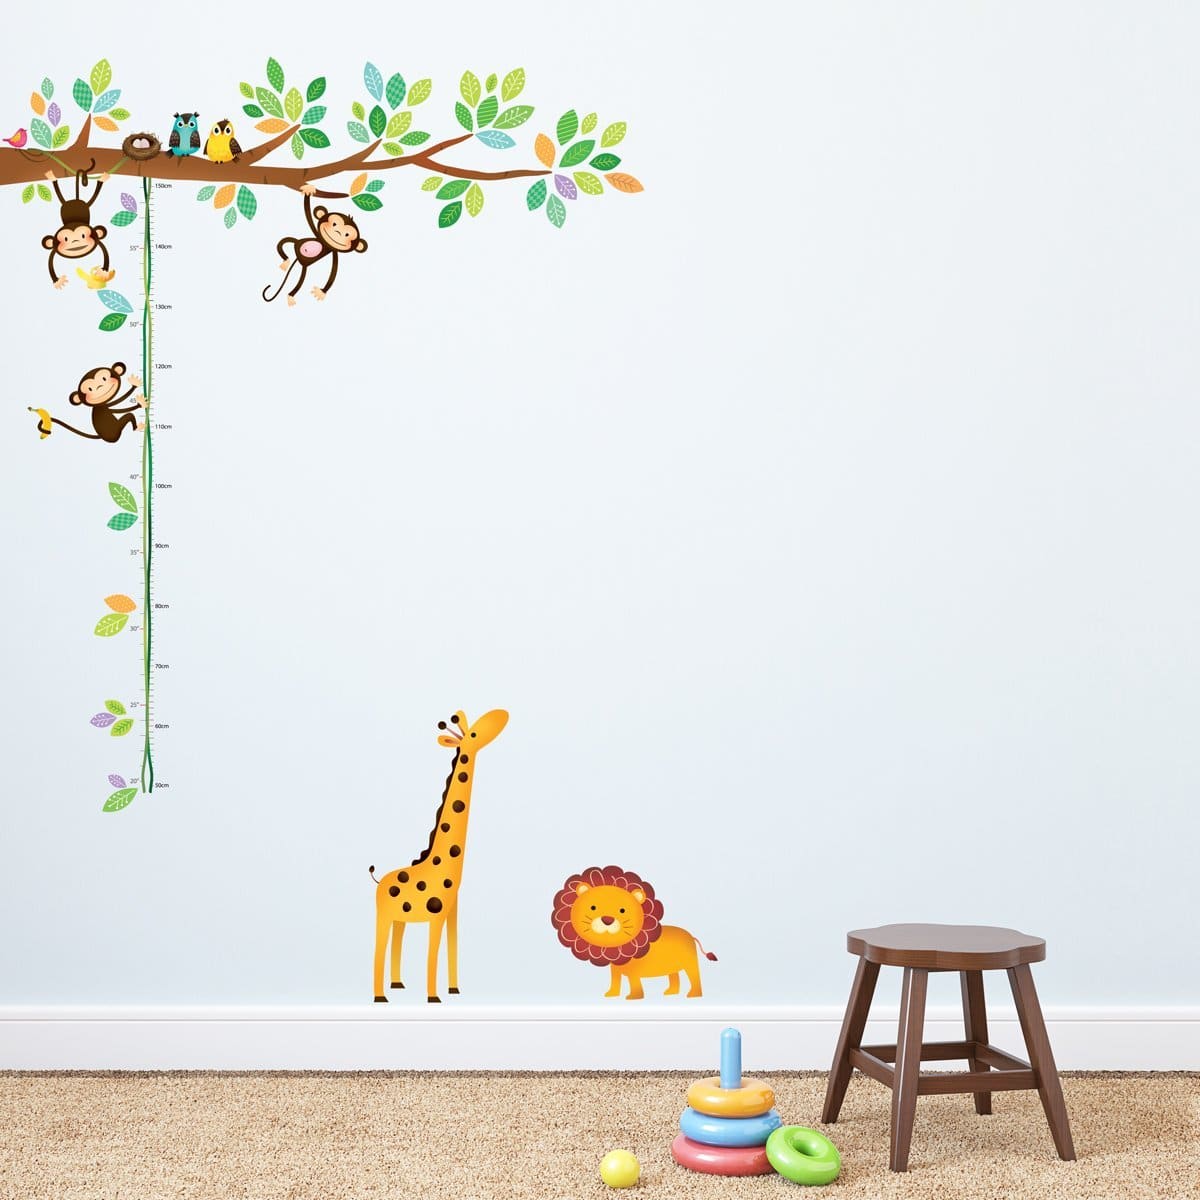 Jungle inspired wall decor for kids.
